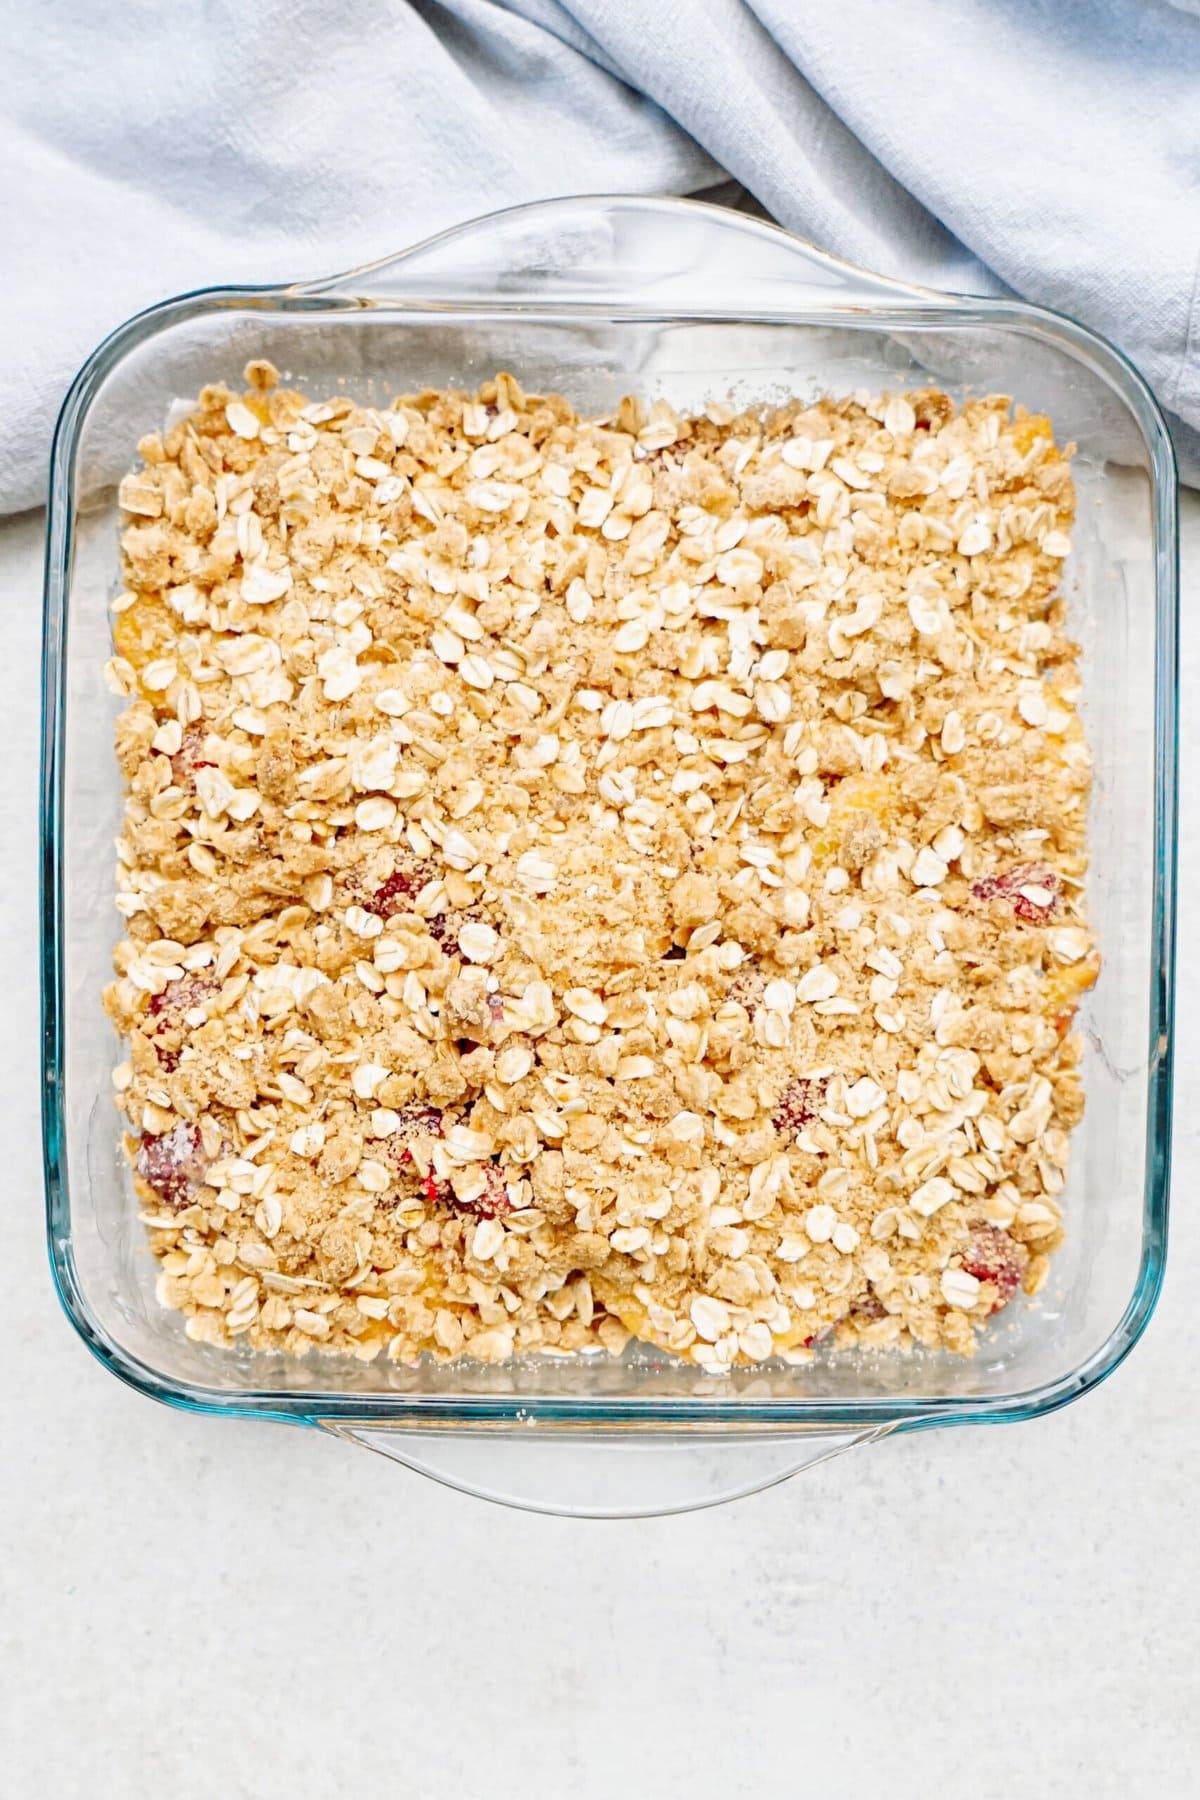 A glass baking dish filled with an unbaked oatmeal raspberry cobbler mixture is set on a light surface with a blue cloth nearby.